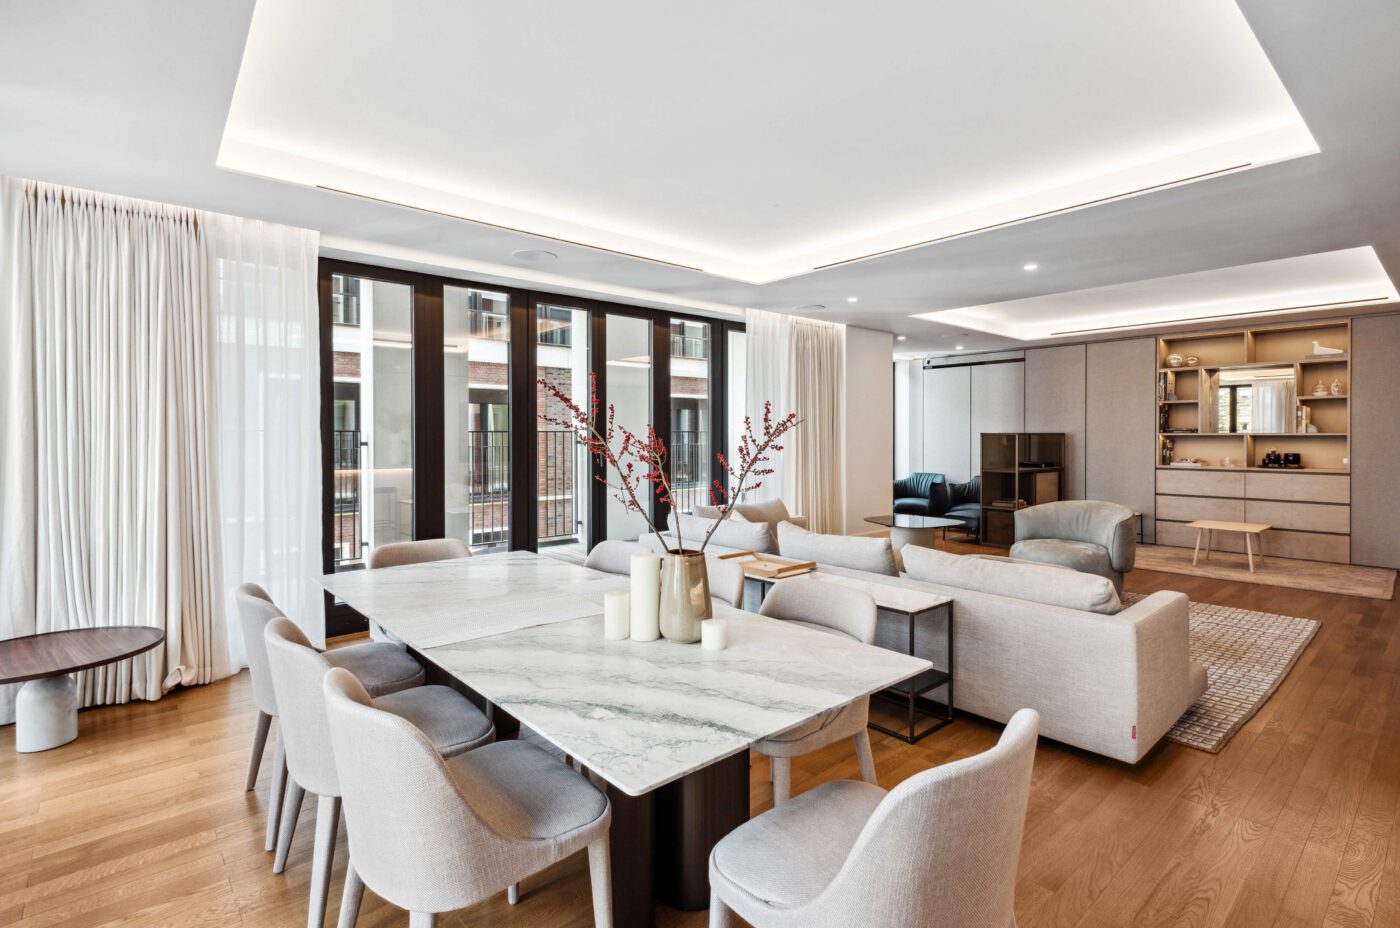 Open plan living and dining room in a new build luxury apartments in london